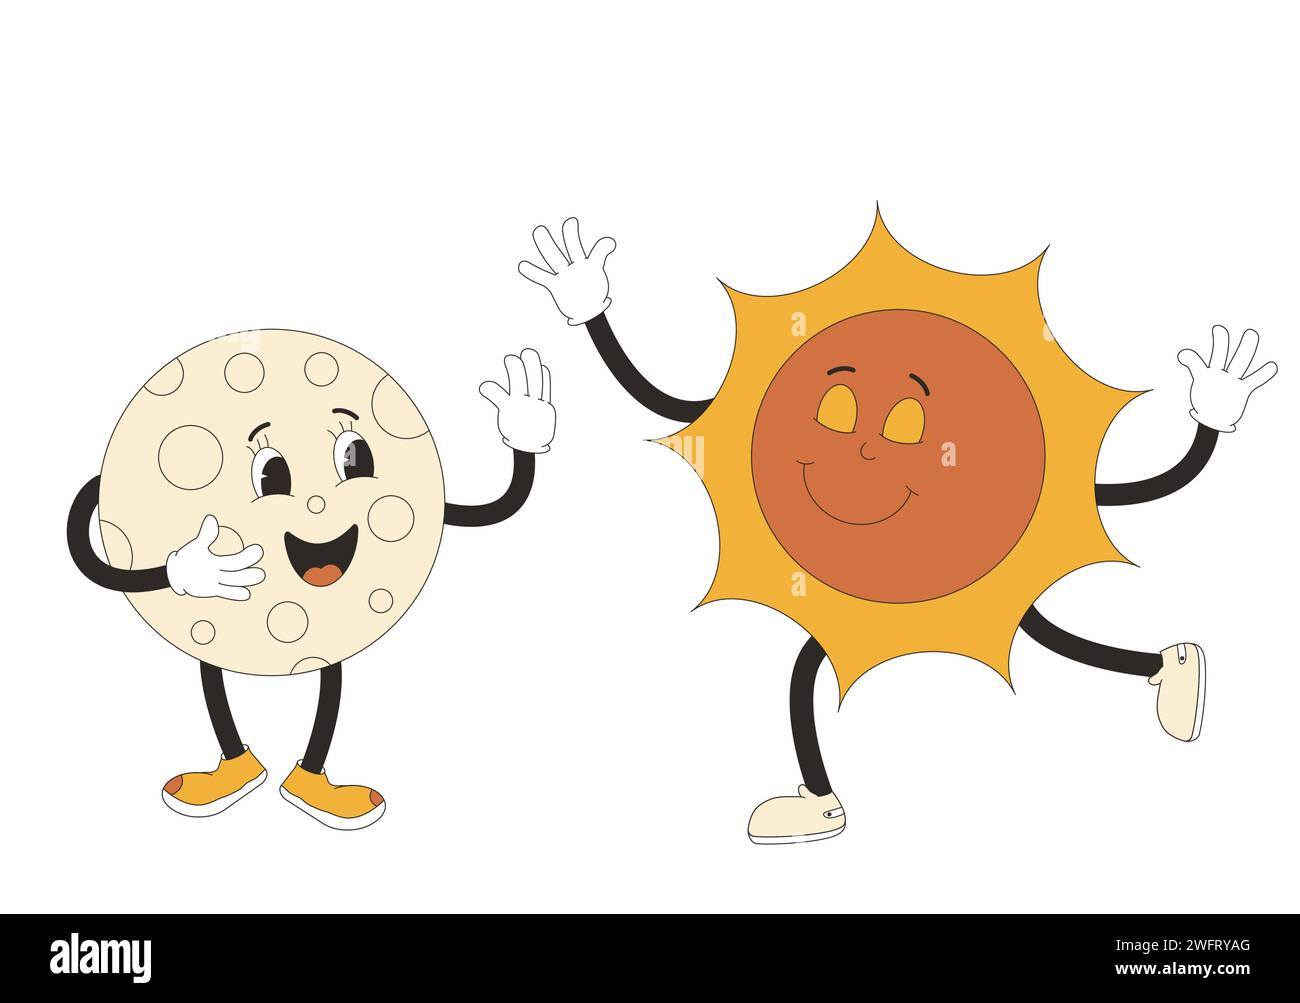 Moon and sun cartoon characters in retro style. Smiling comic characters isolated on white background. Vector illustration. Stock Vector